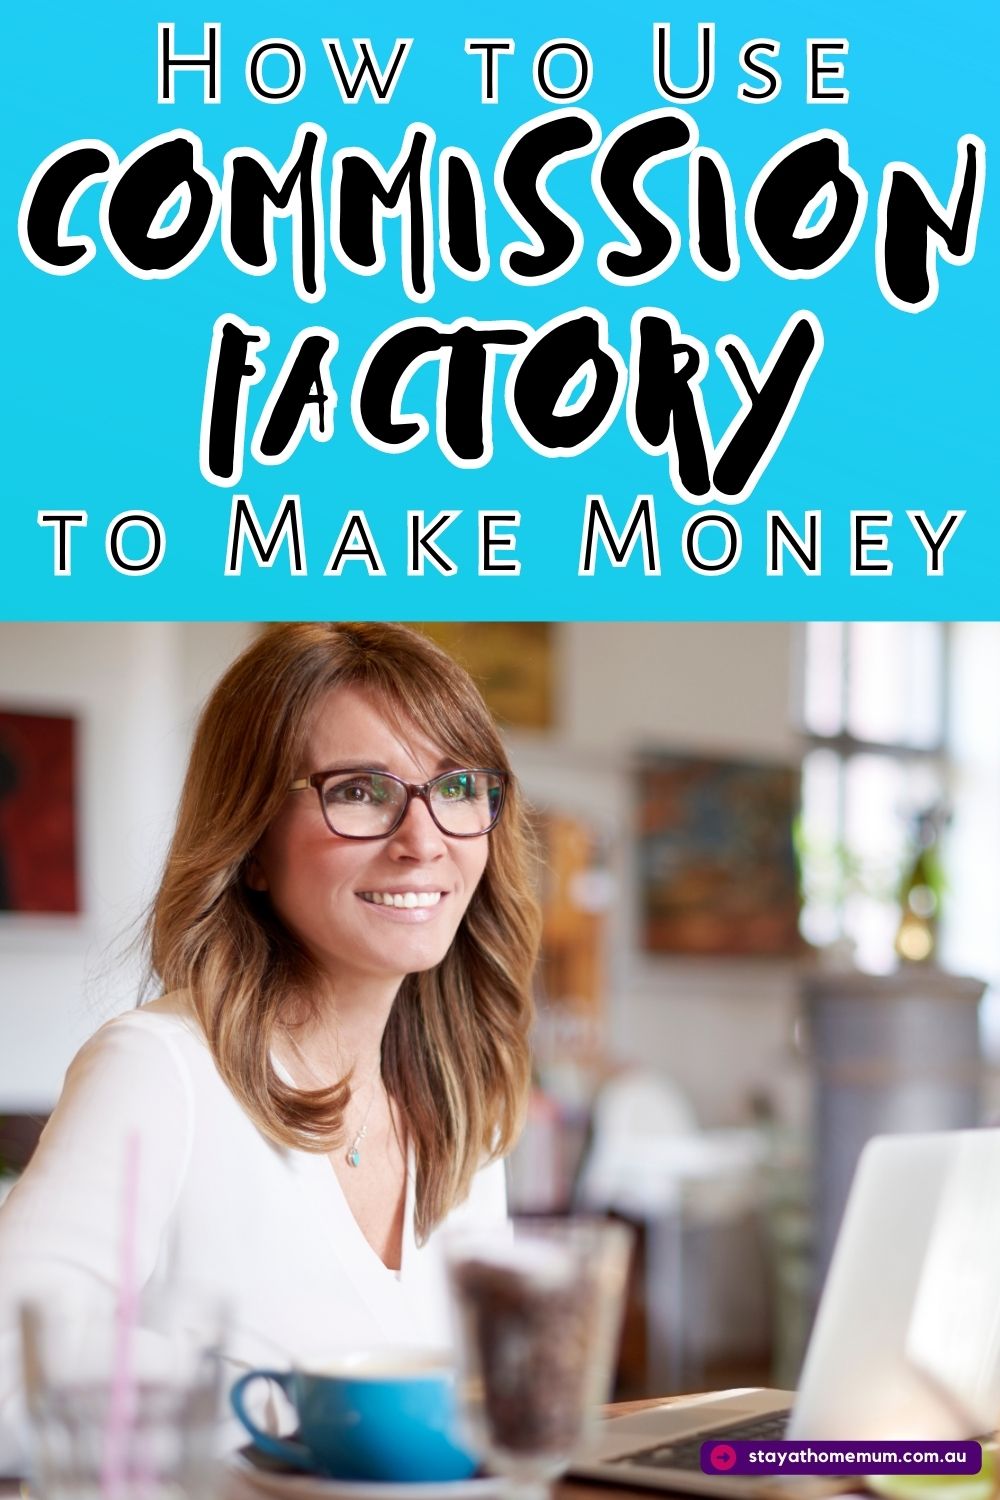 How to Use Commission Factory to Make Money Pinnable